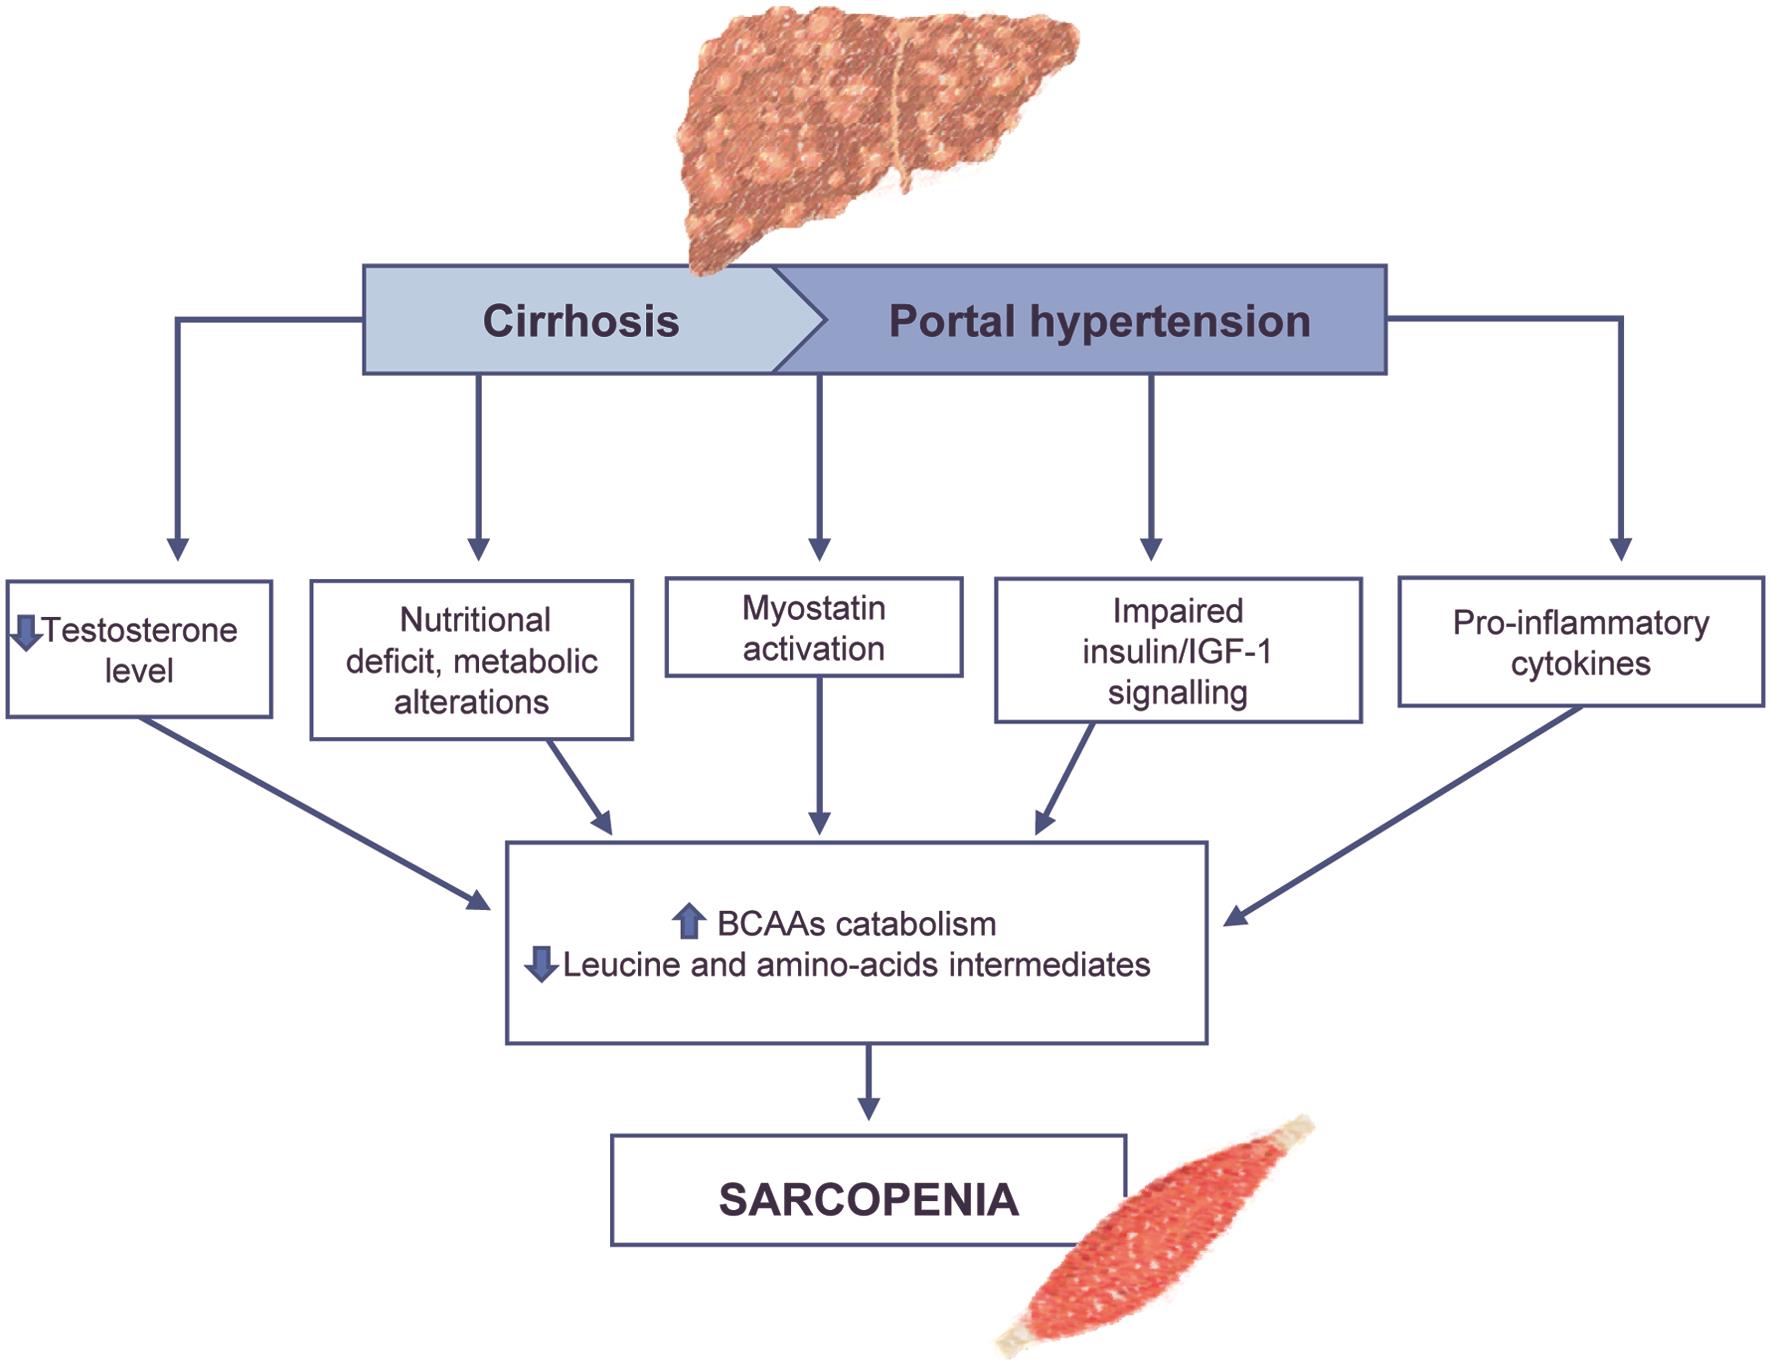 Summary of the main relevant players contributing to sarcopenia in cirrhosis: